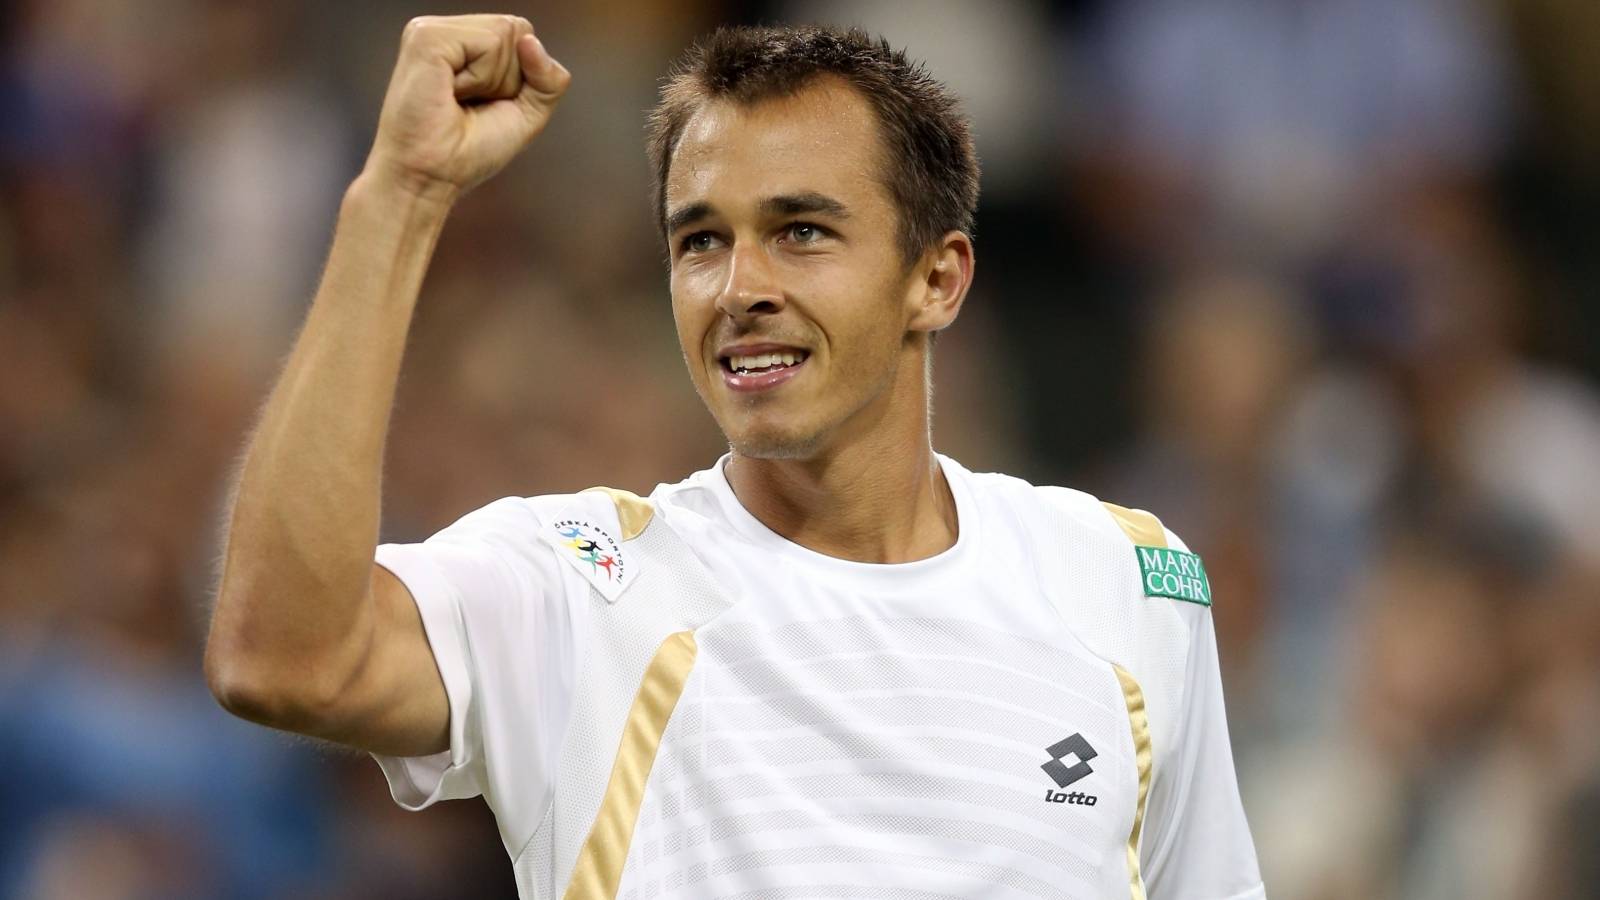 Jan Satral VS Lukas Rosol ( BETTING TIPS, Match Preview & Expert Analysis )™